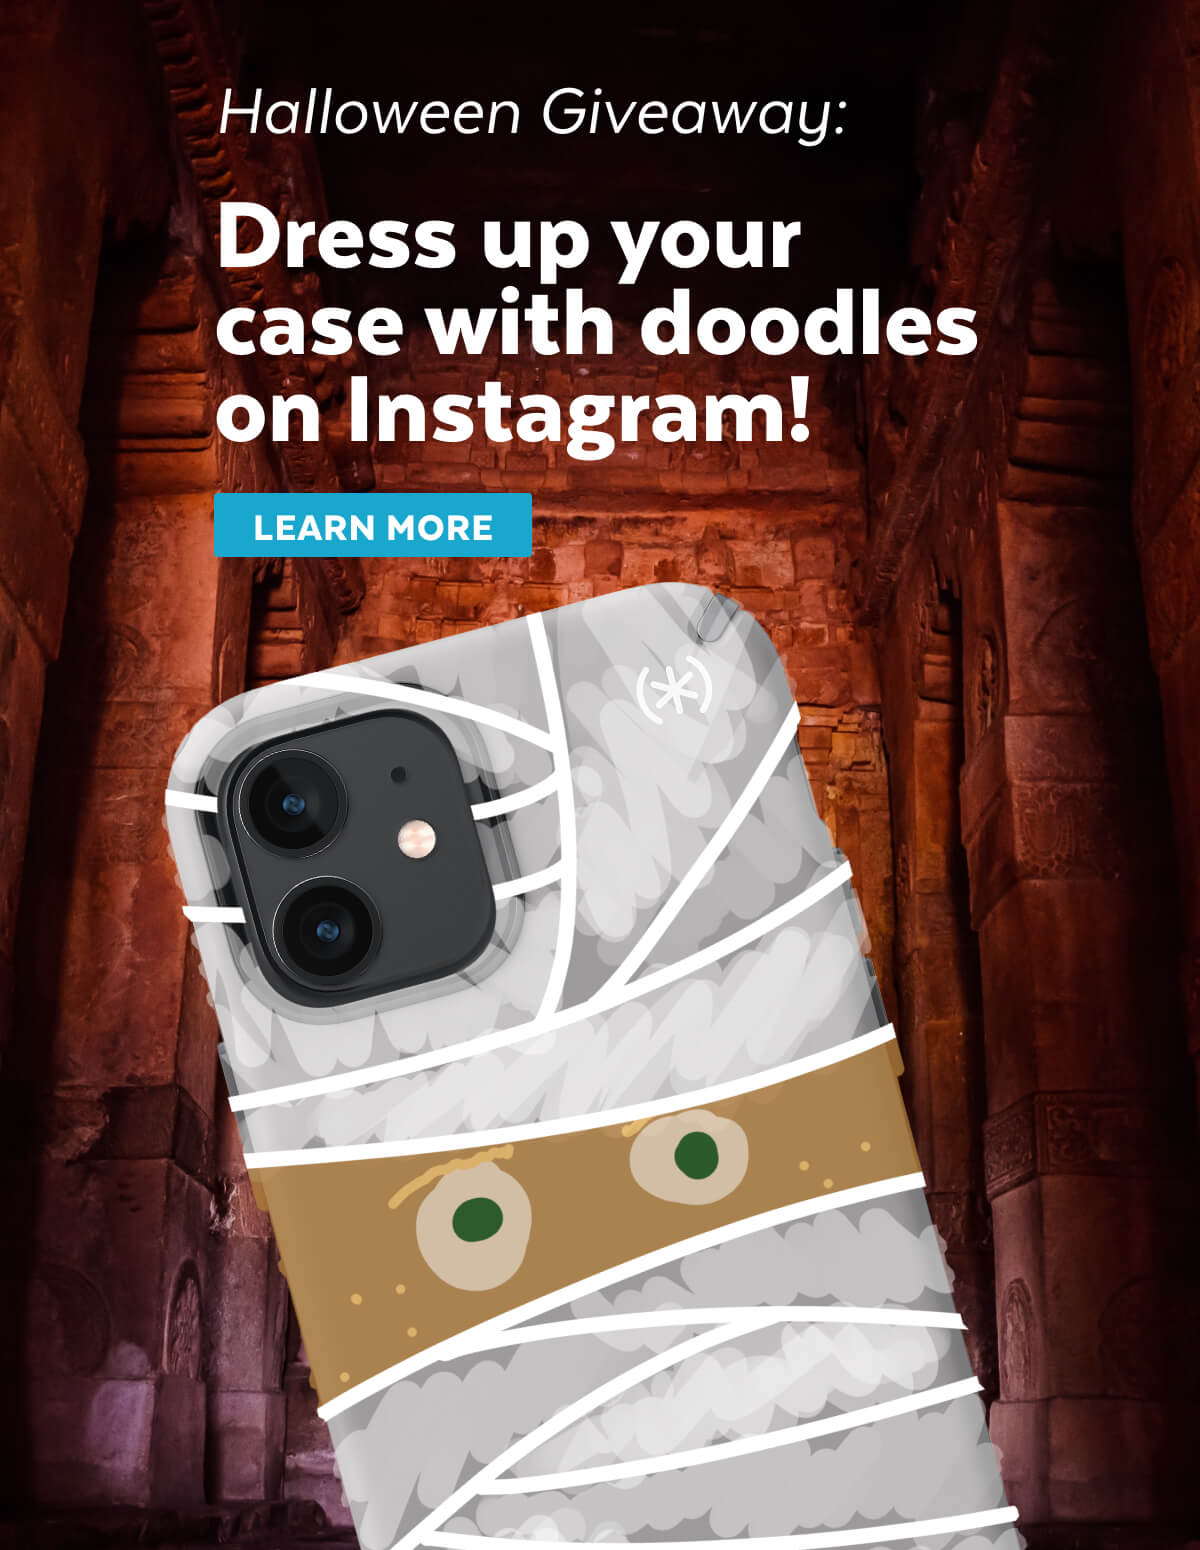 Halloween Giveaway: Dress up your case with doodles on Instagram! Learn More.